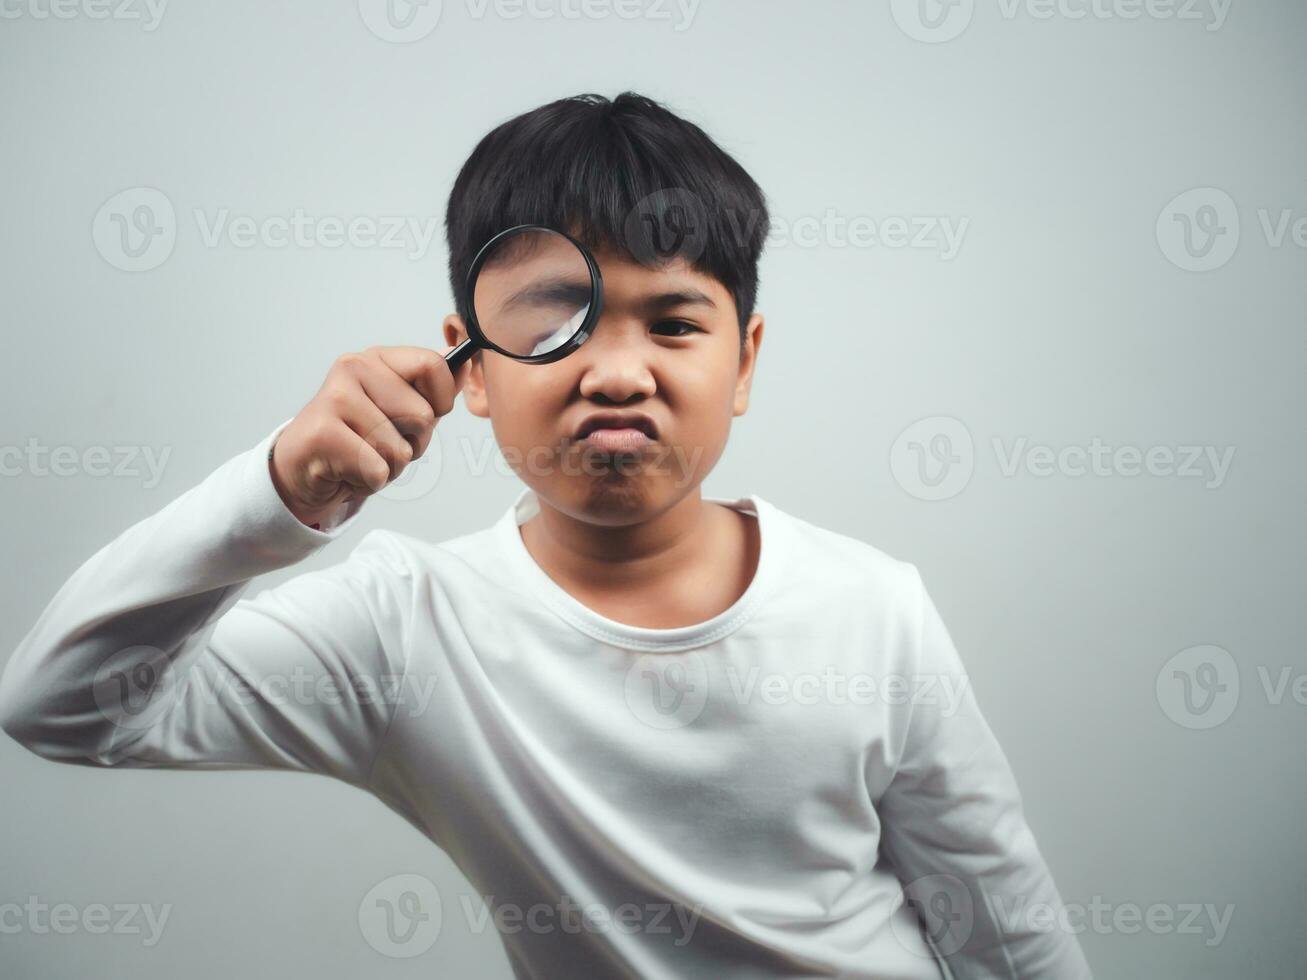 A boy wearing a white long-sleeved shirt is holding a magnifying glass on a white background. photo